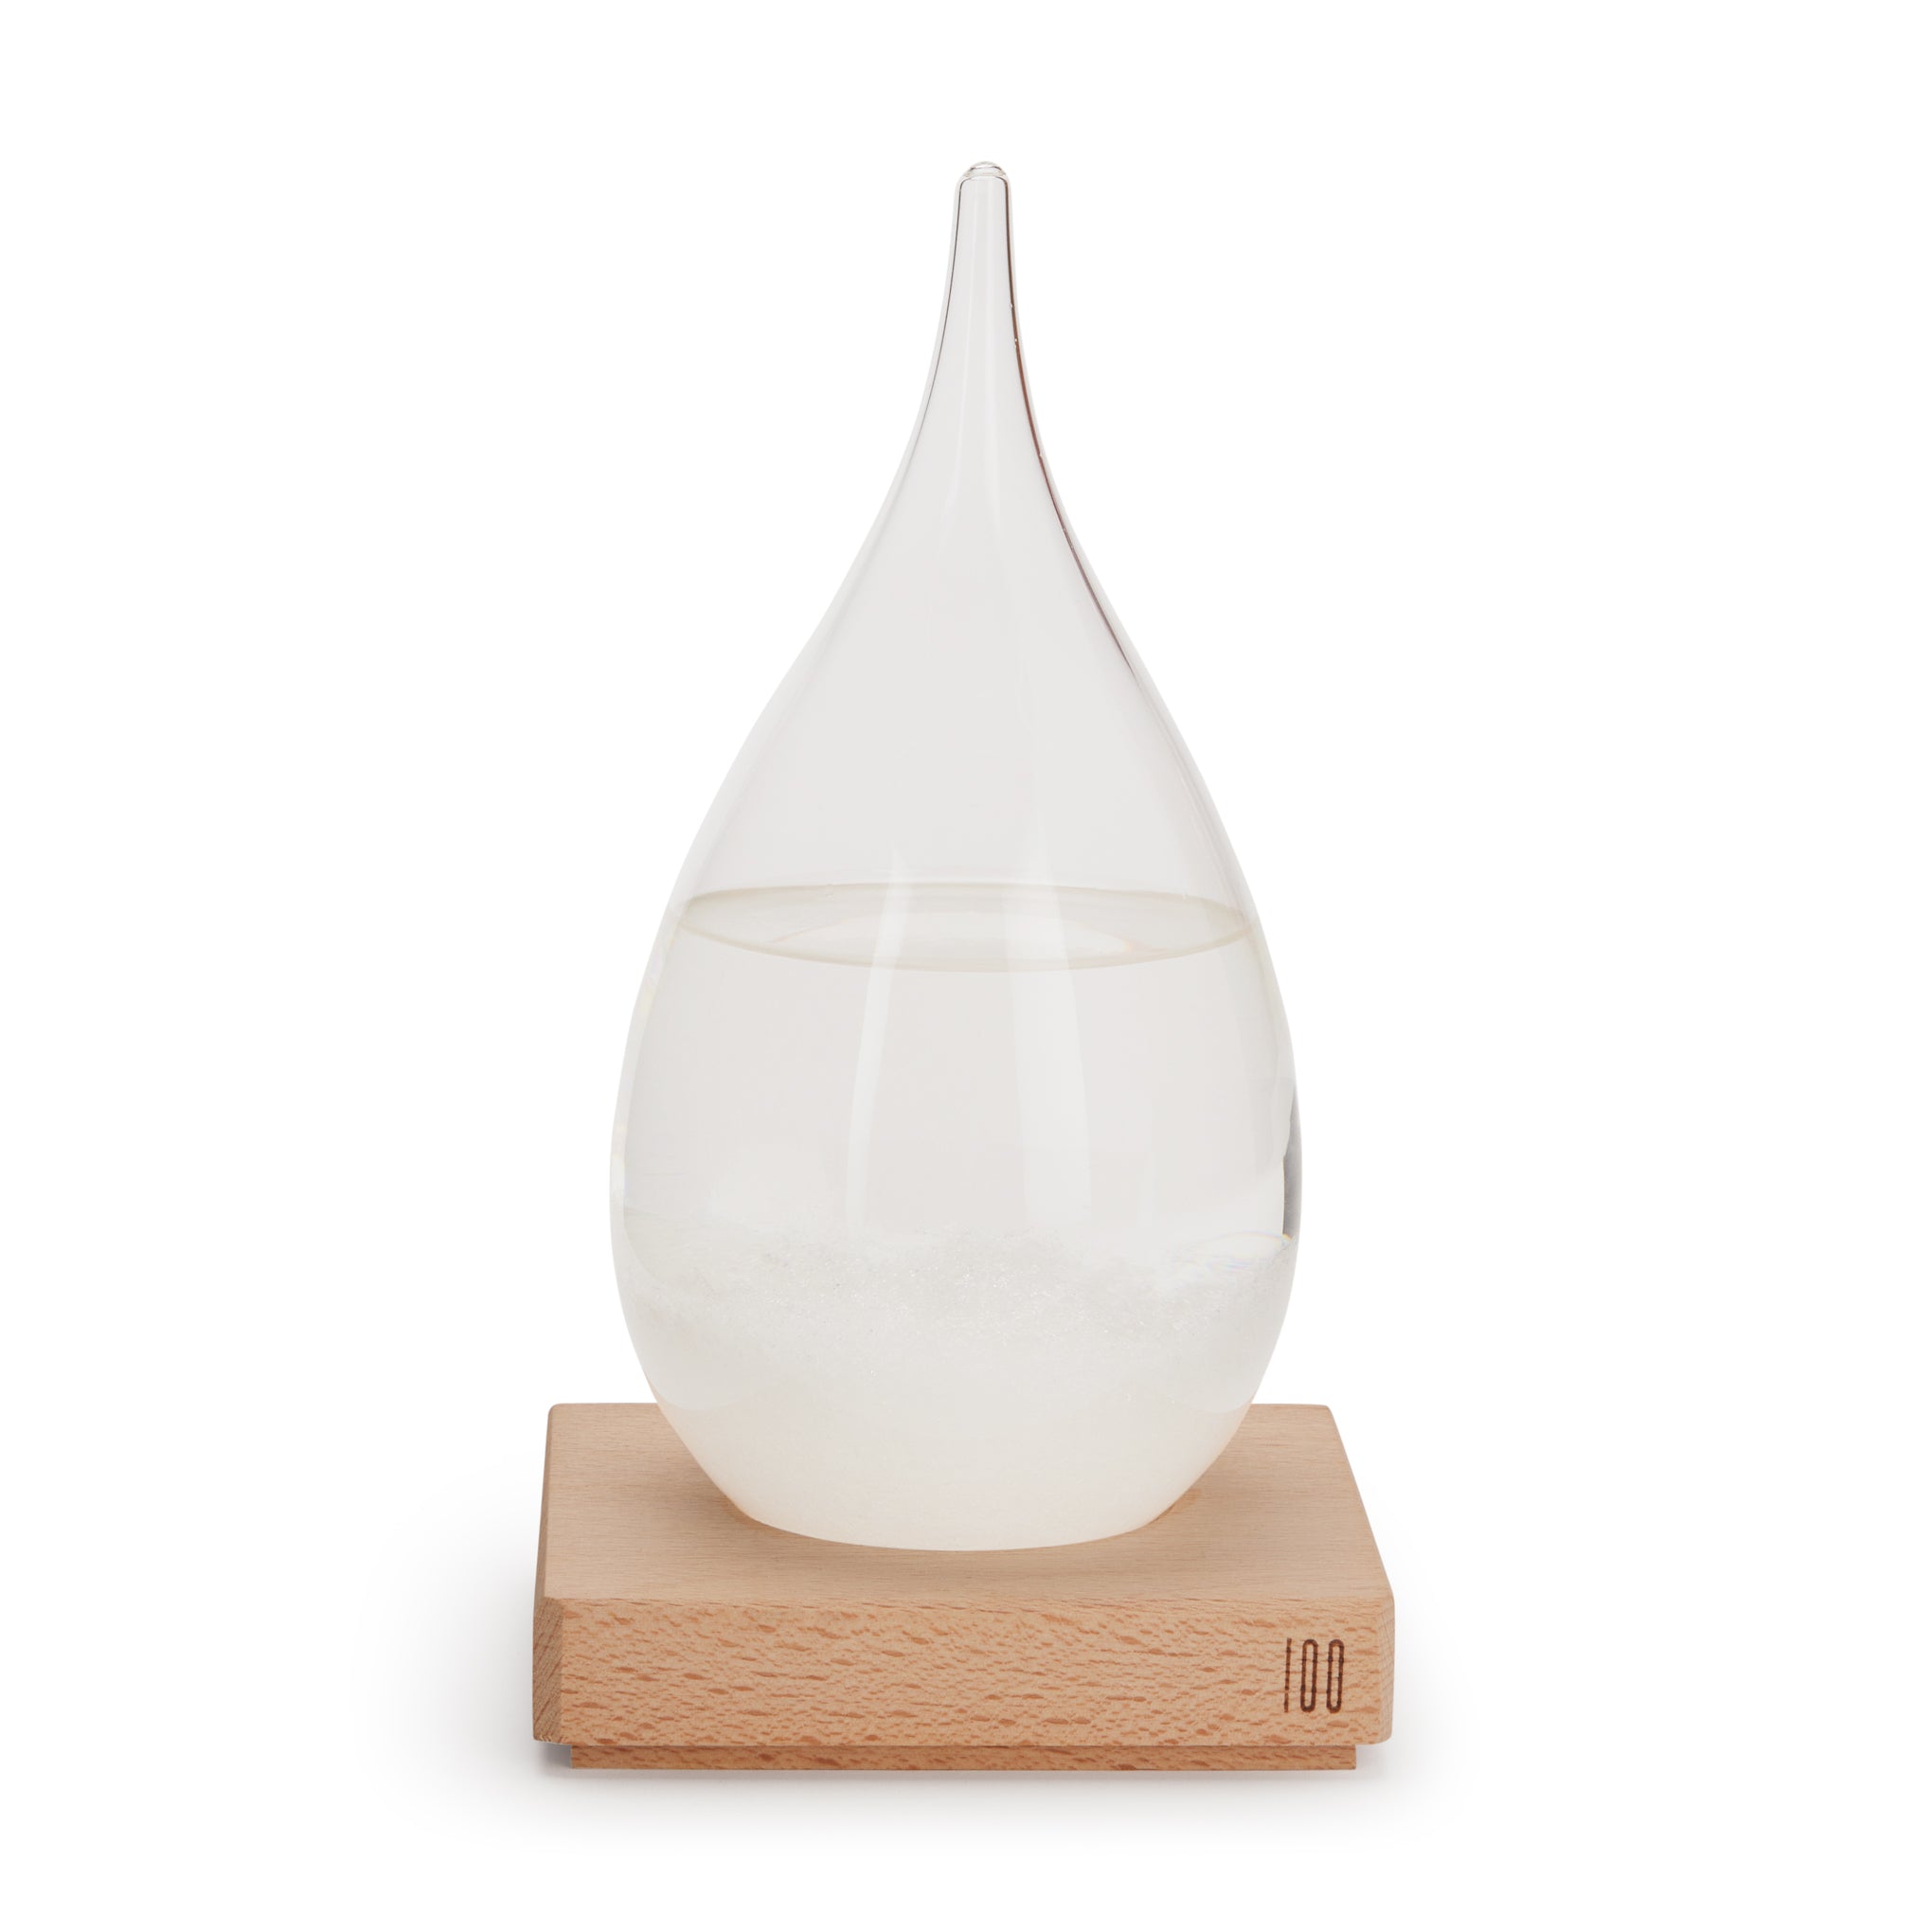 Tempo Drop Storm Glass Weather Forecaster – MoMA Design Store